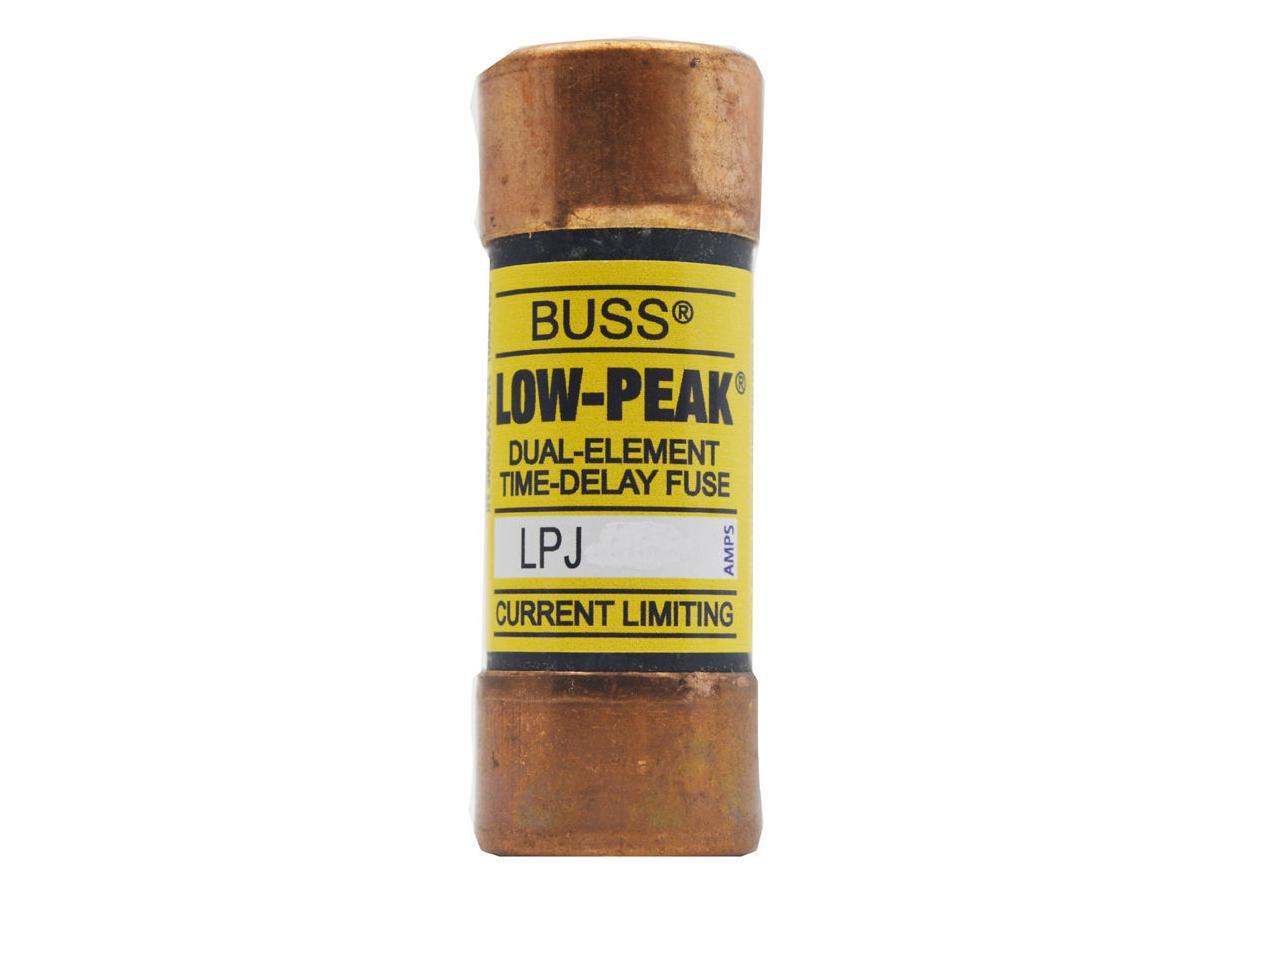 Cooper Bussmann LPJ-20SP Fuses Box of 10 Free UPS 3 Day Shipping 